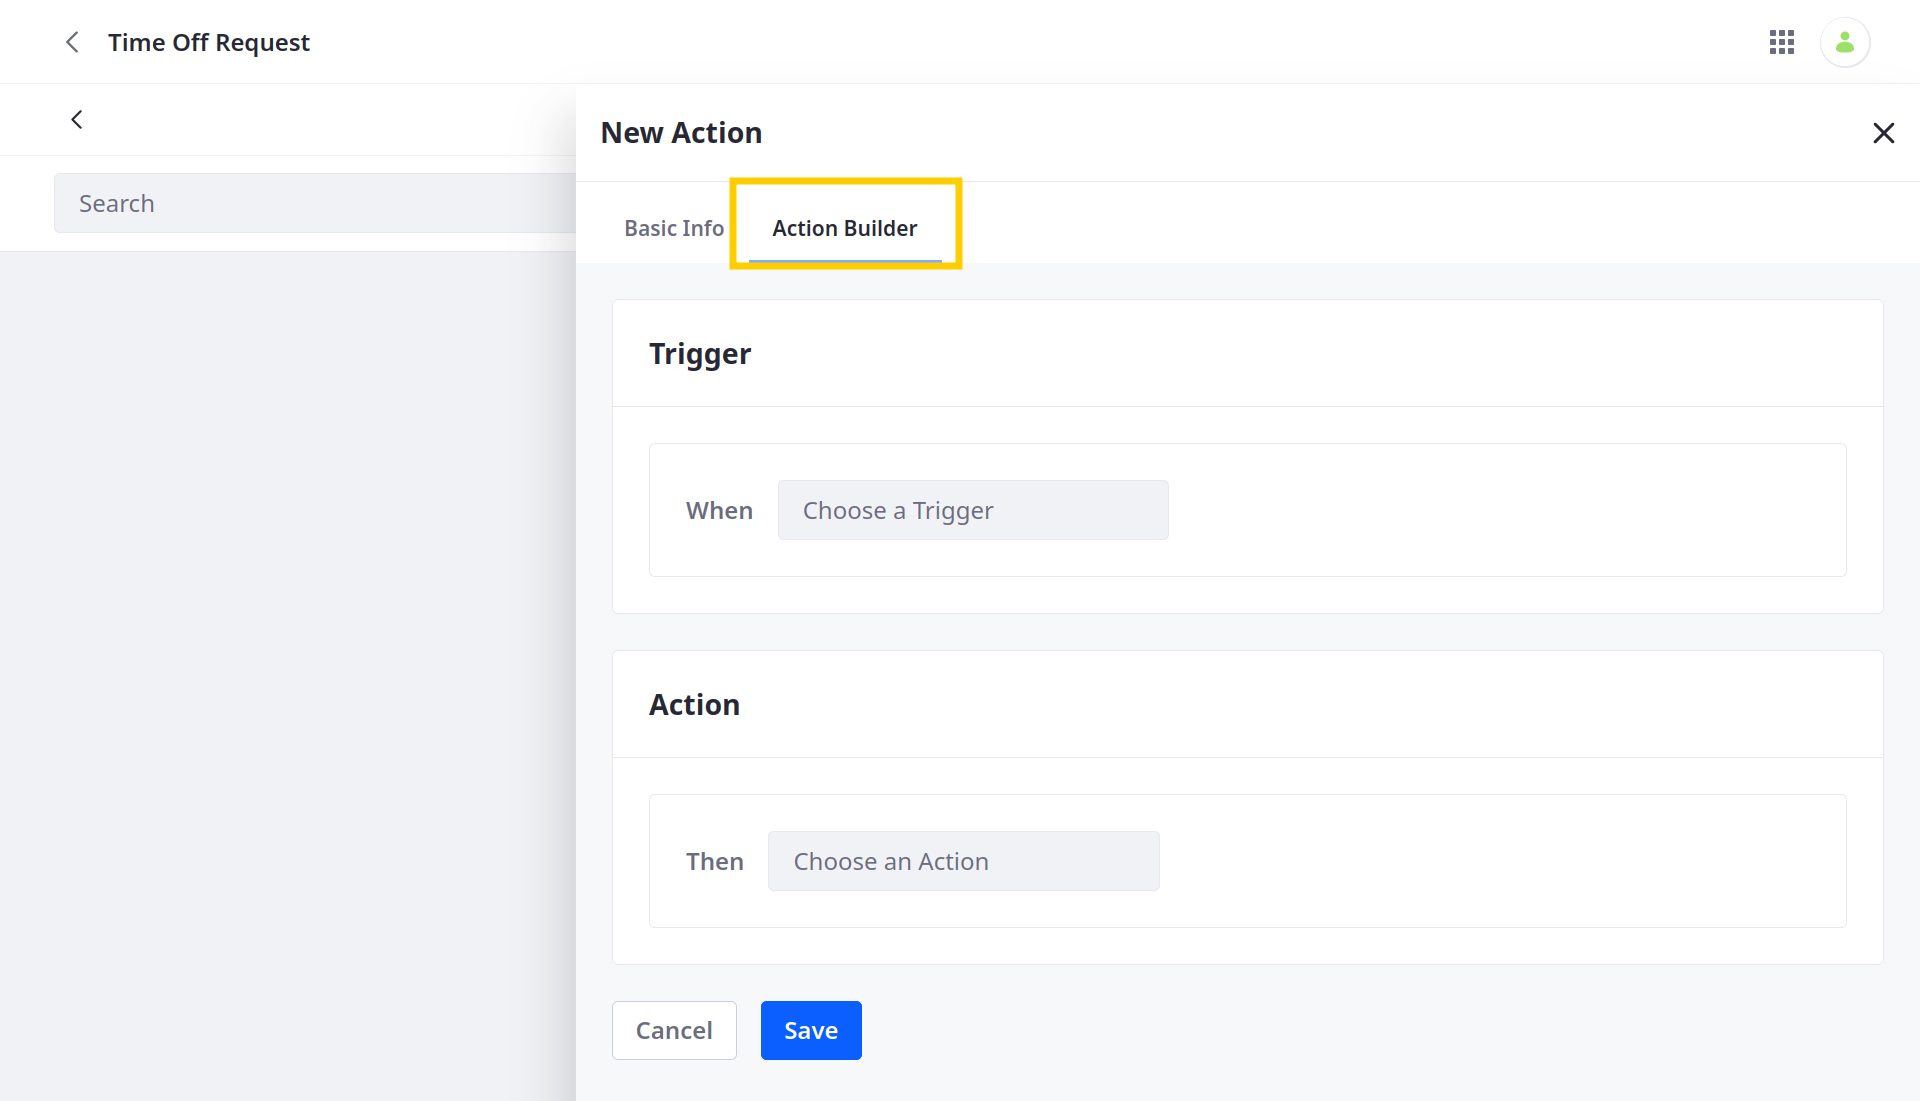 Go to the Action Builder tab to define a custom trigger, conditions, and action.